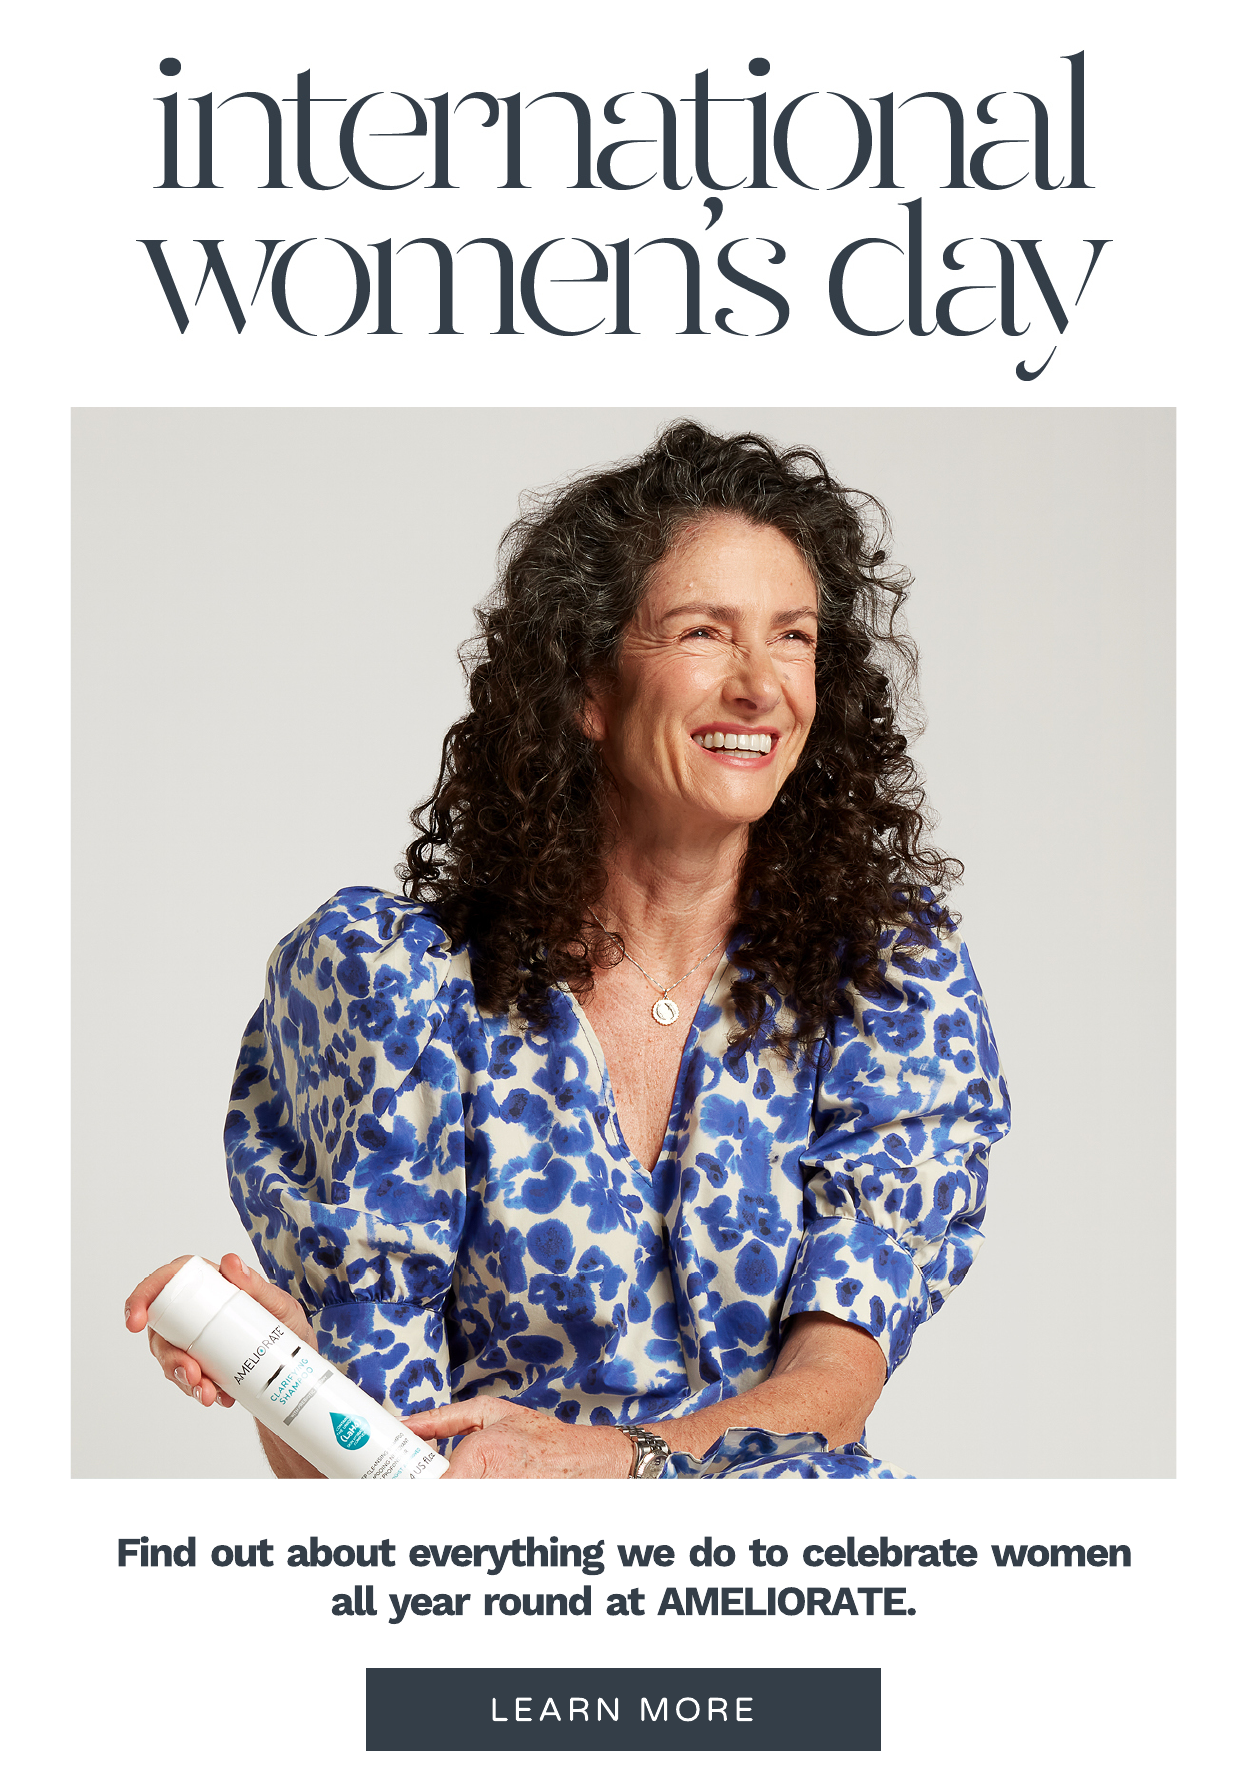 Find out how we celebrate women all year round at AMELIORATE